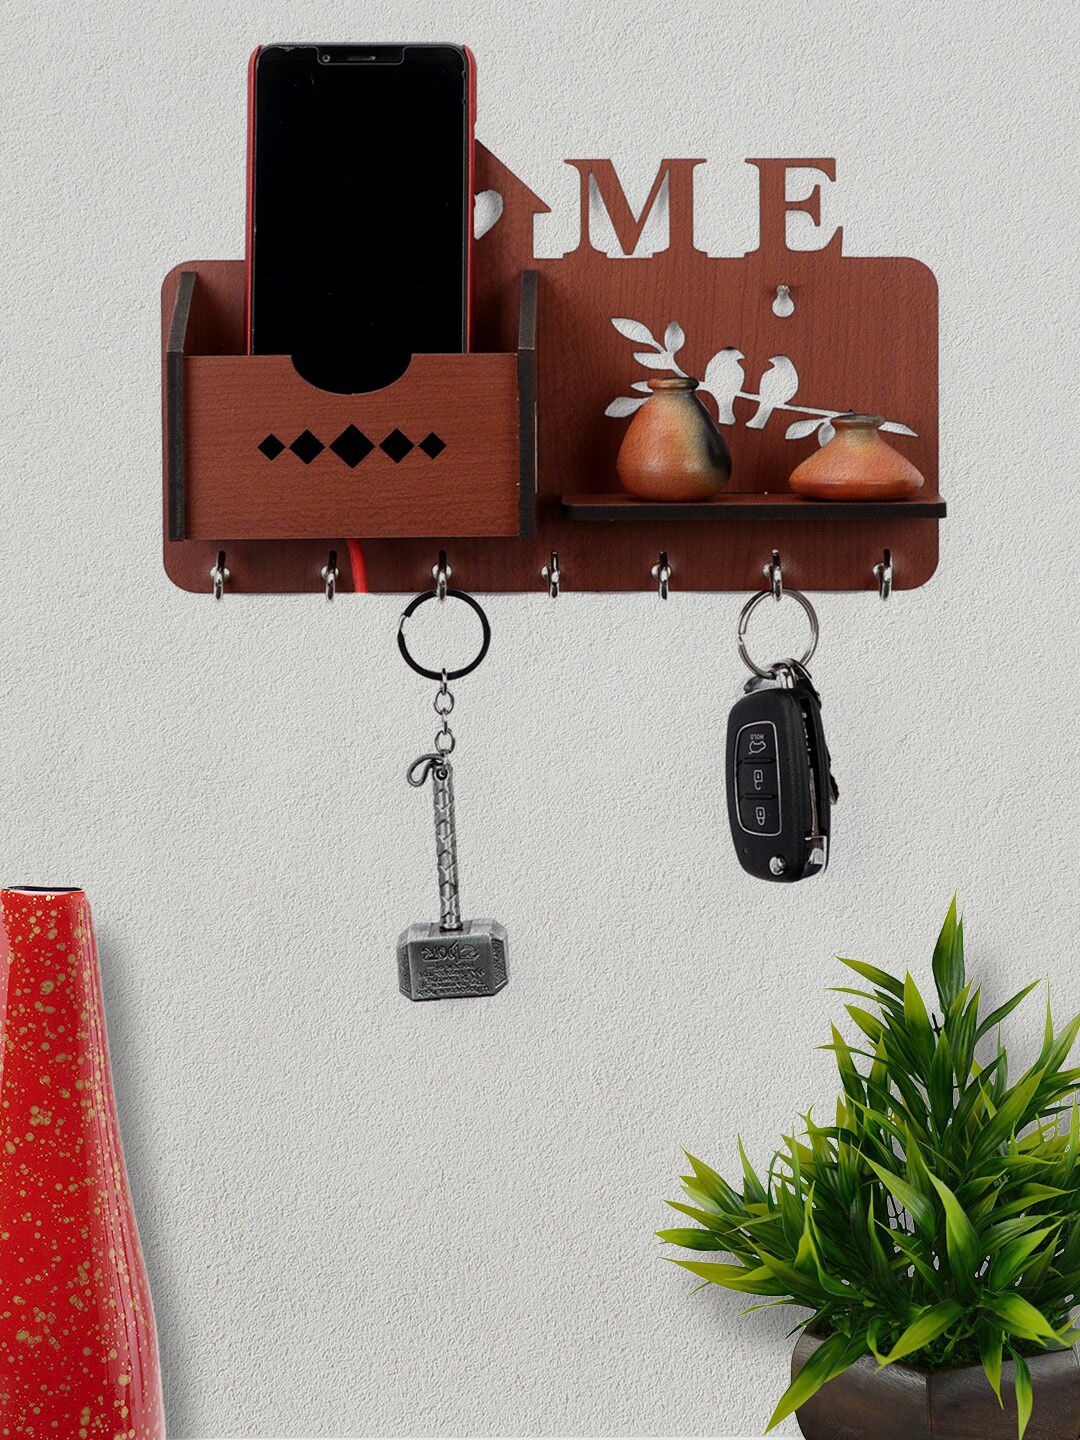 ROMEE Brown Wall Key & Mobile Stand Holder Price in India